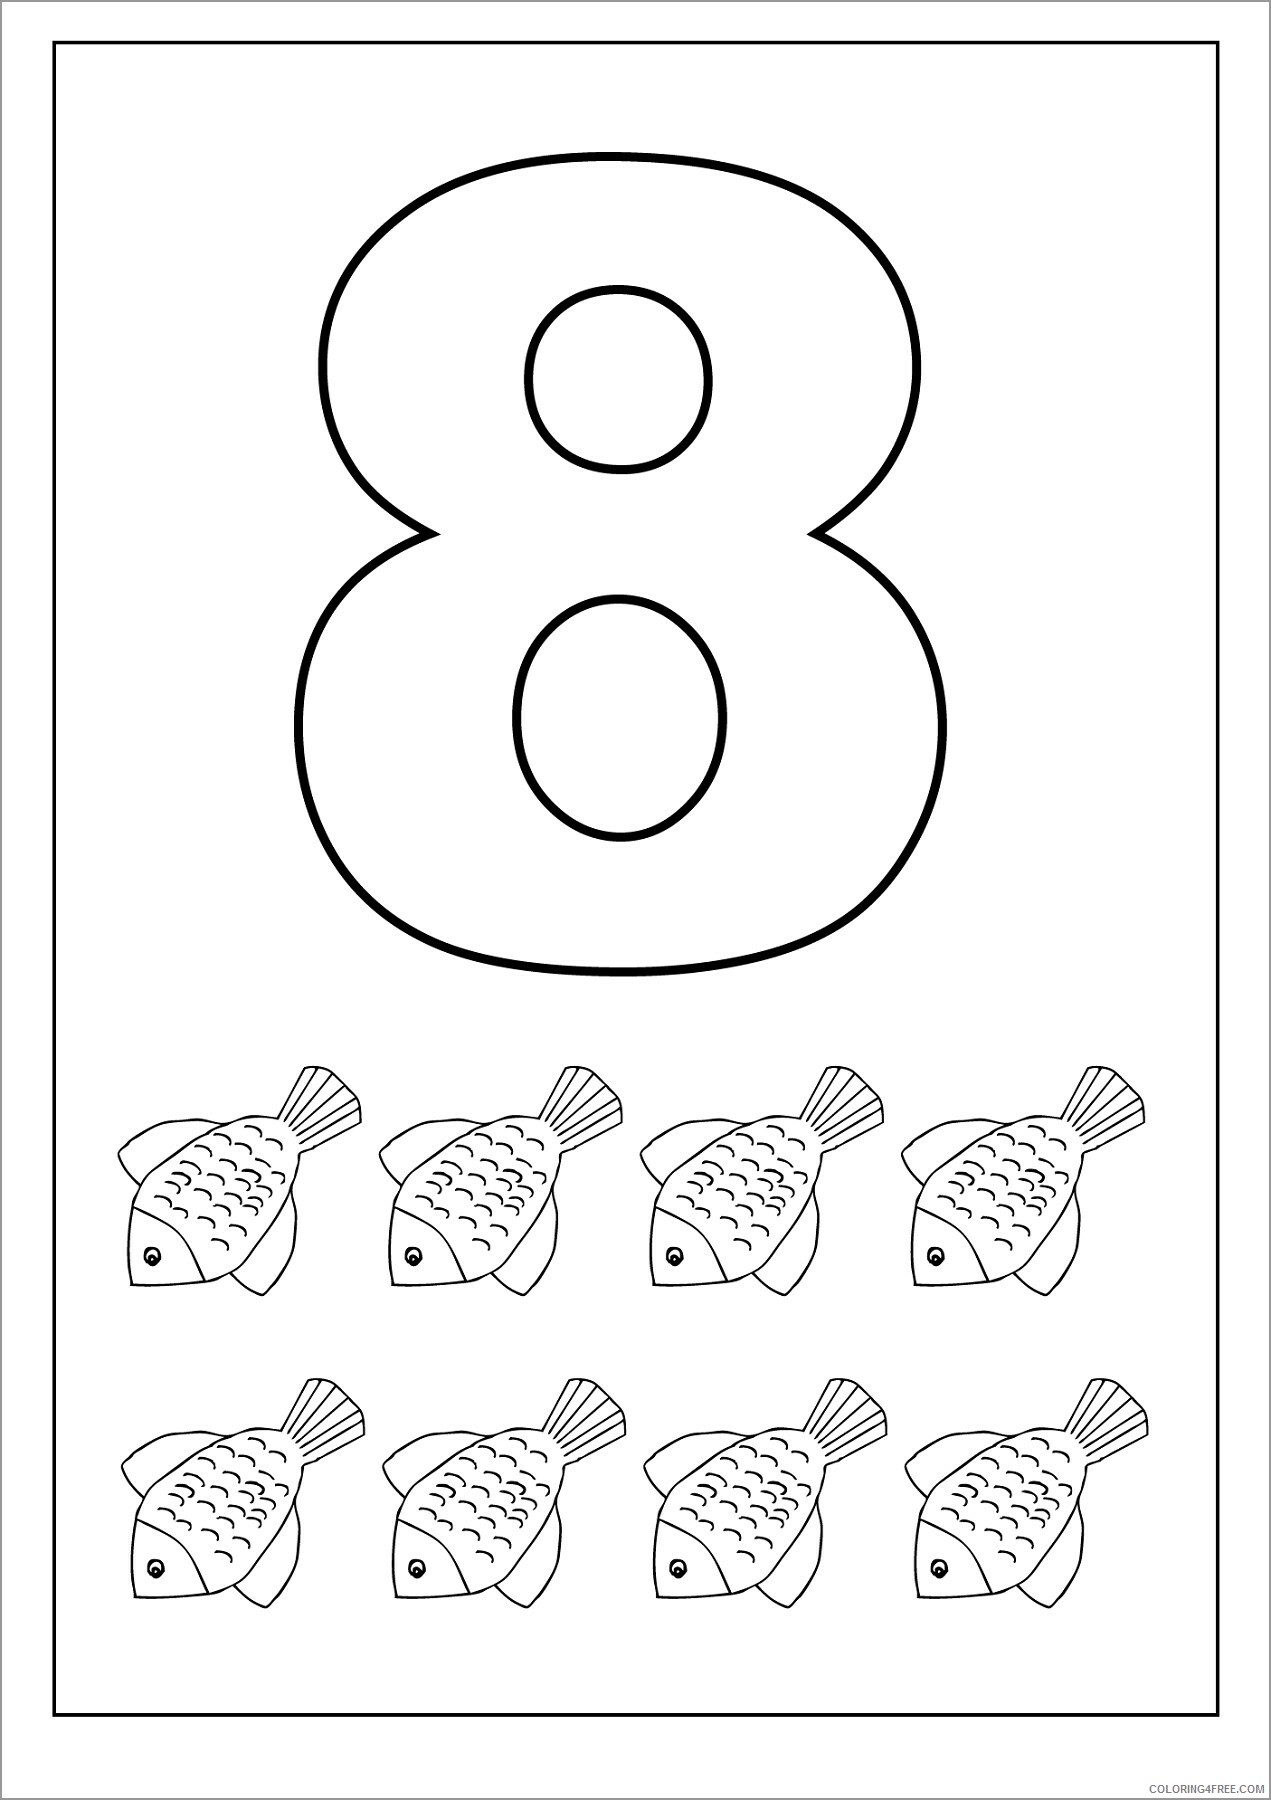 Fish Coloring Pages Animal Printable Sheets number 8 fish 2021 2111 Coloring4free